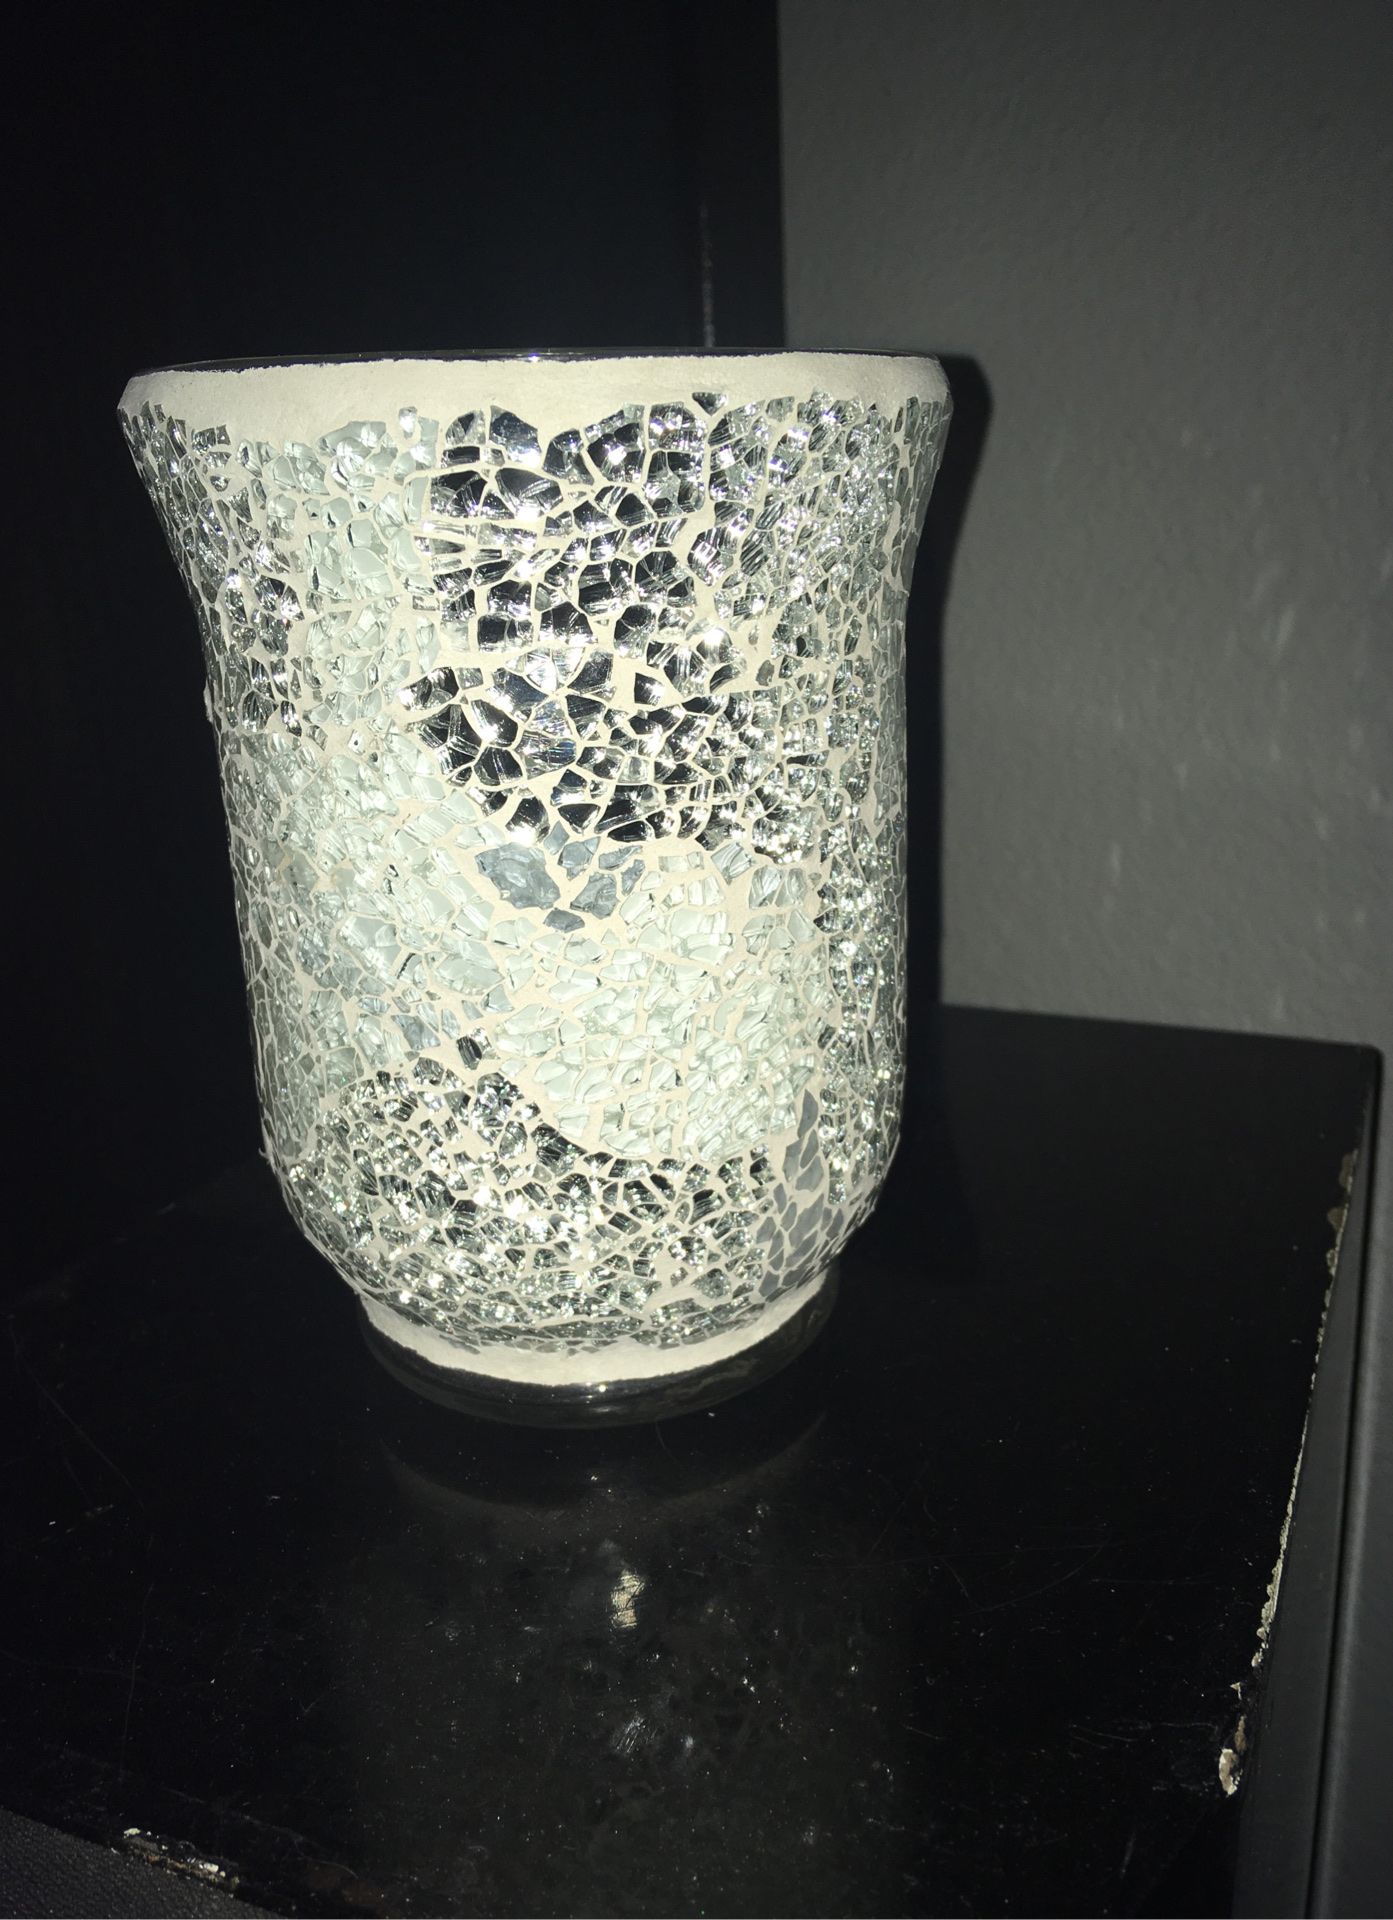 White with glass mosaic you could use it as a vase or a candleholder very pretty